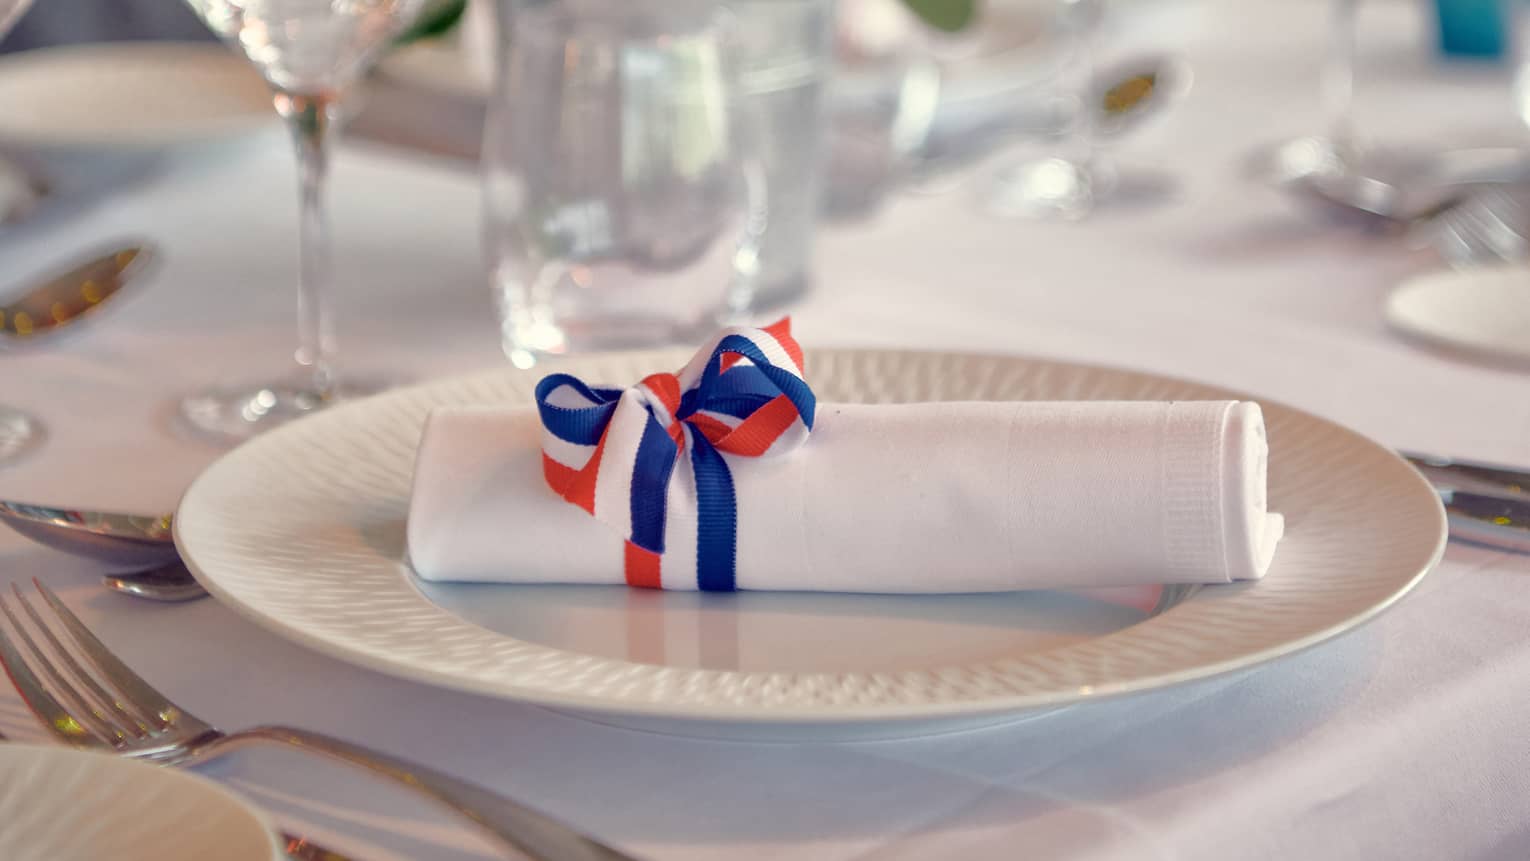 Table setting featuring the French flag